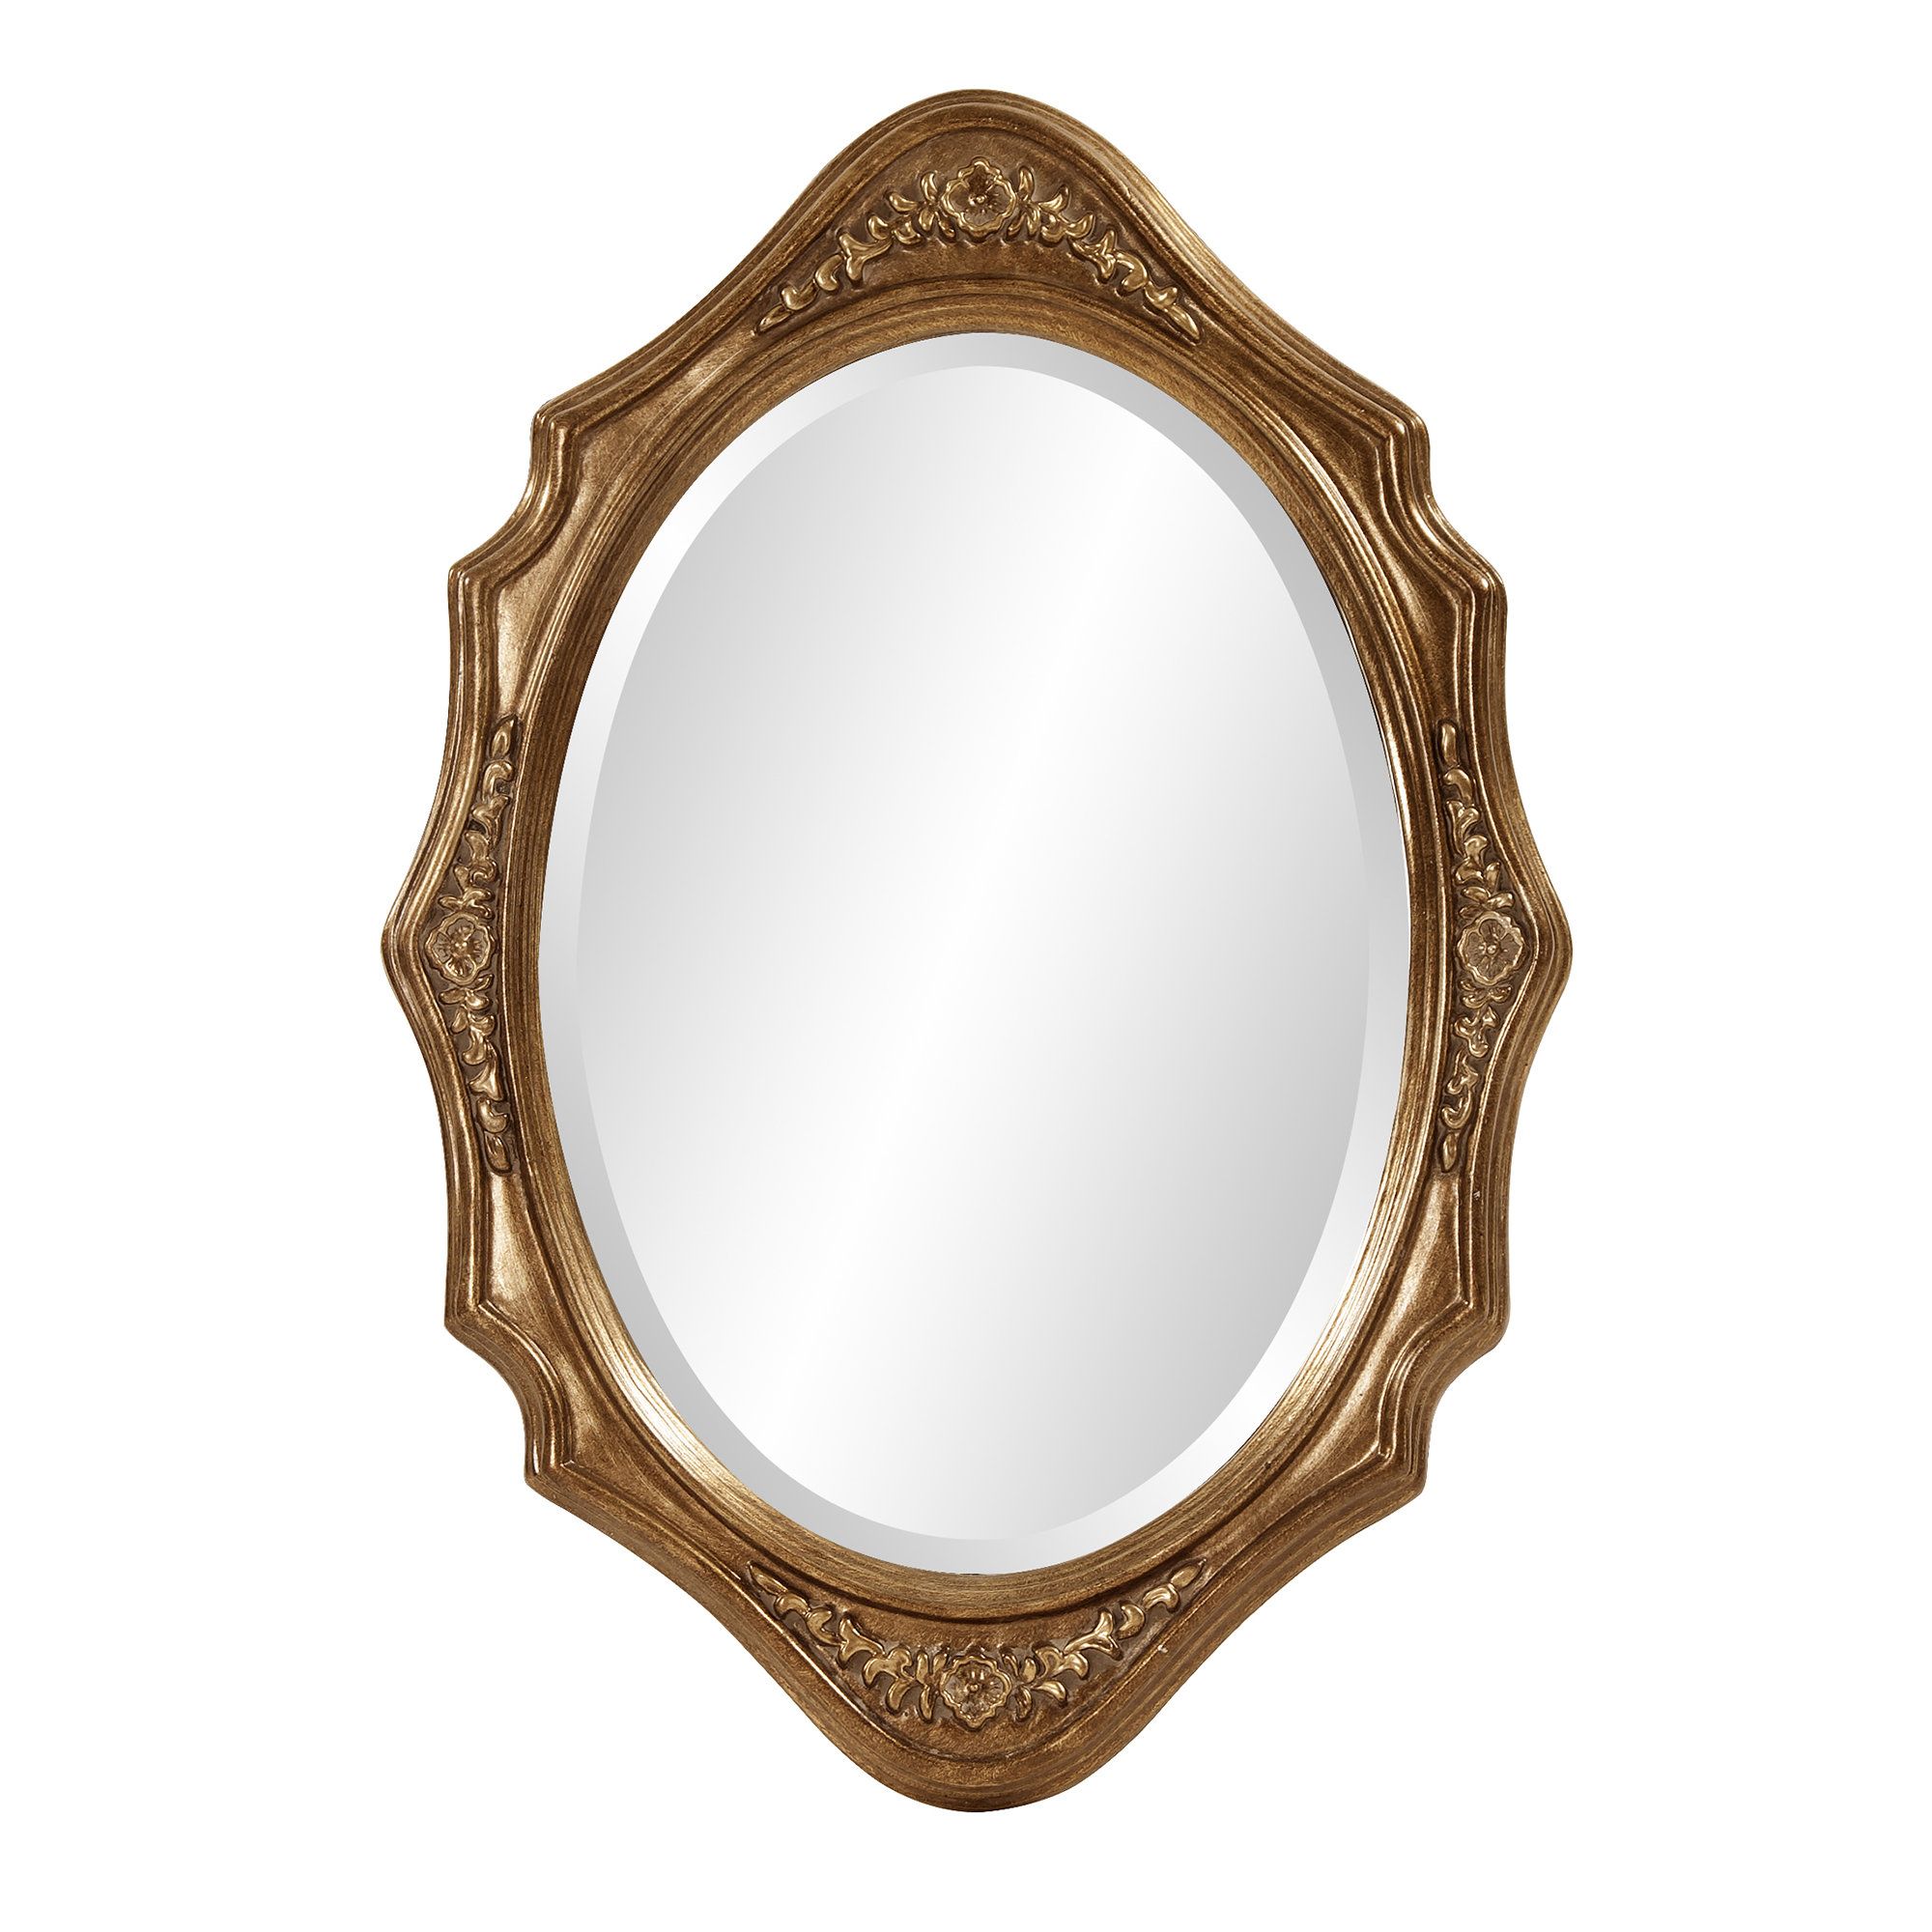 Accent Mirror Pertaining To Latest Broadmeadow Glam Accent Wall Mirrors (View 15 of 20)